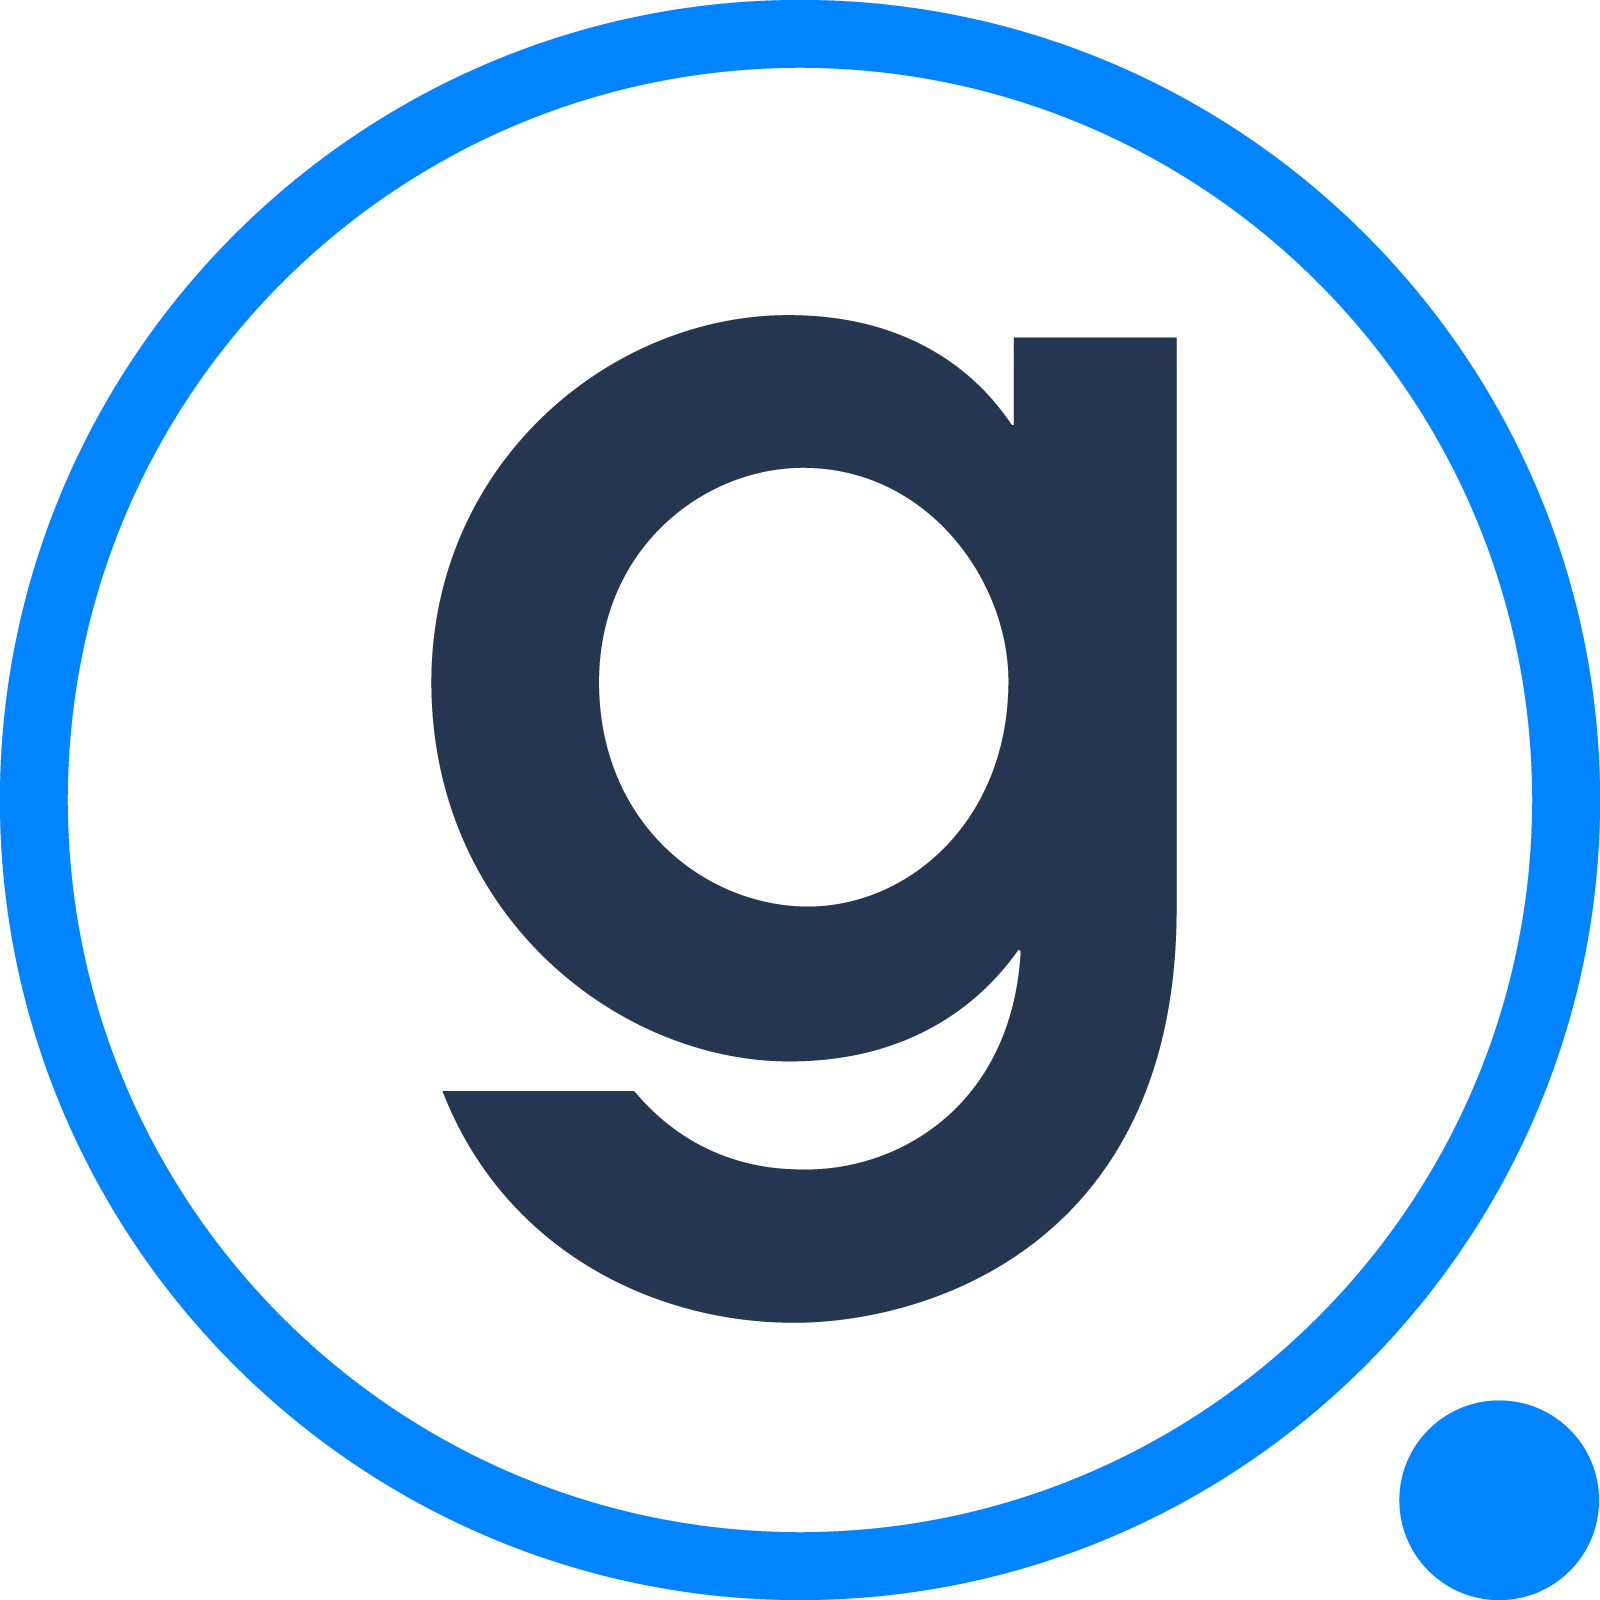 Blue and dark Gravity legal logo. It is a blue circle with a lower case dark blue g inside it.